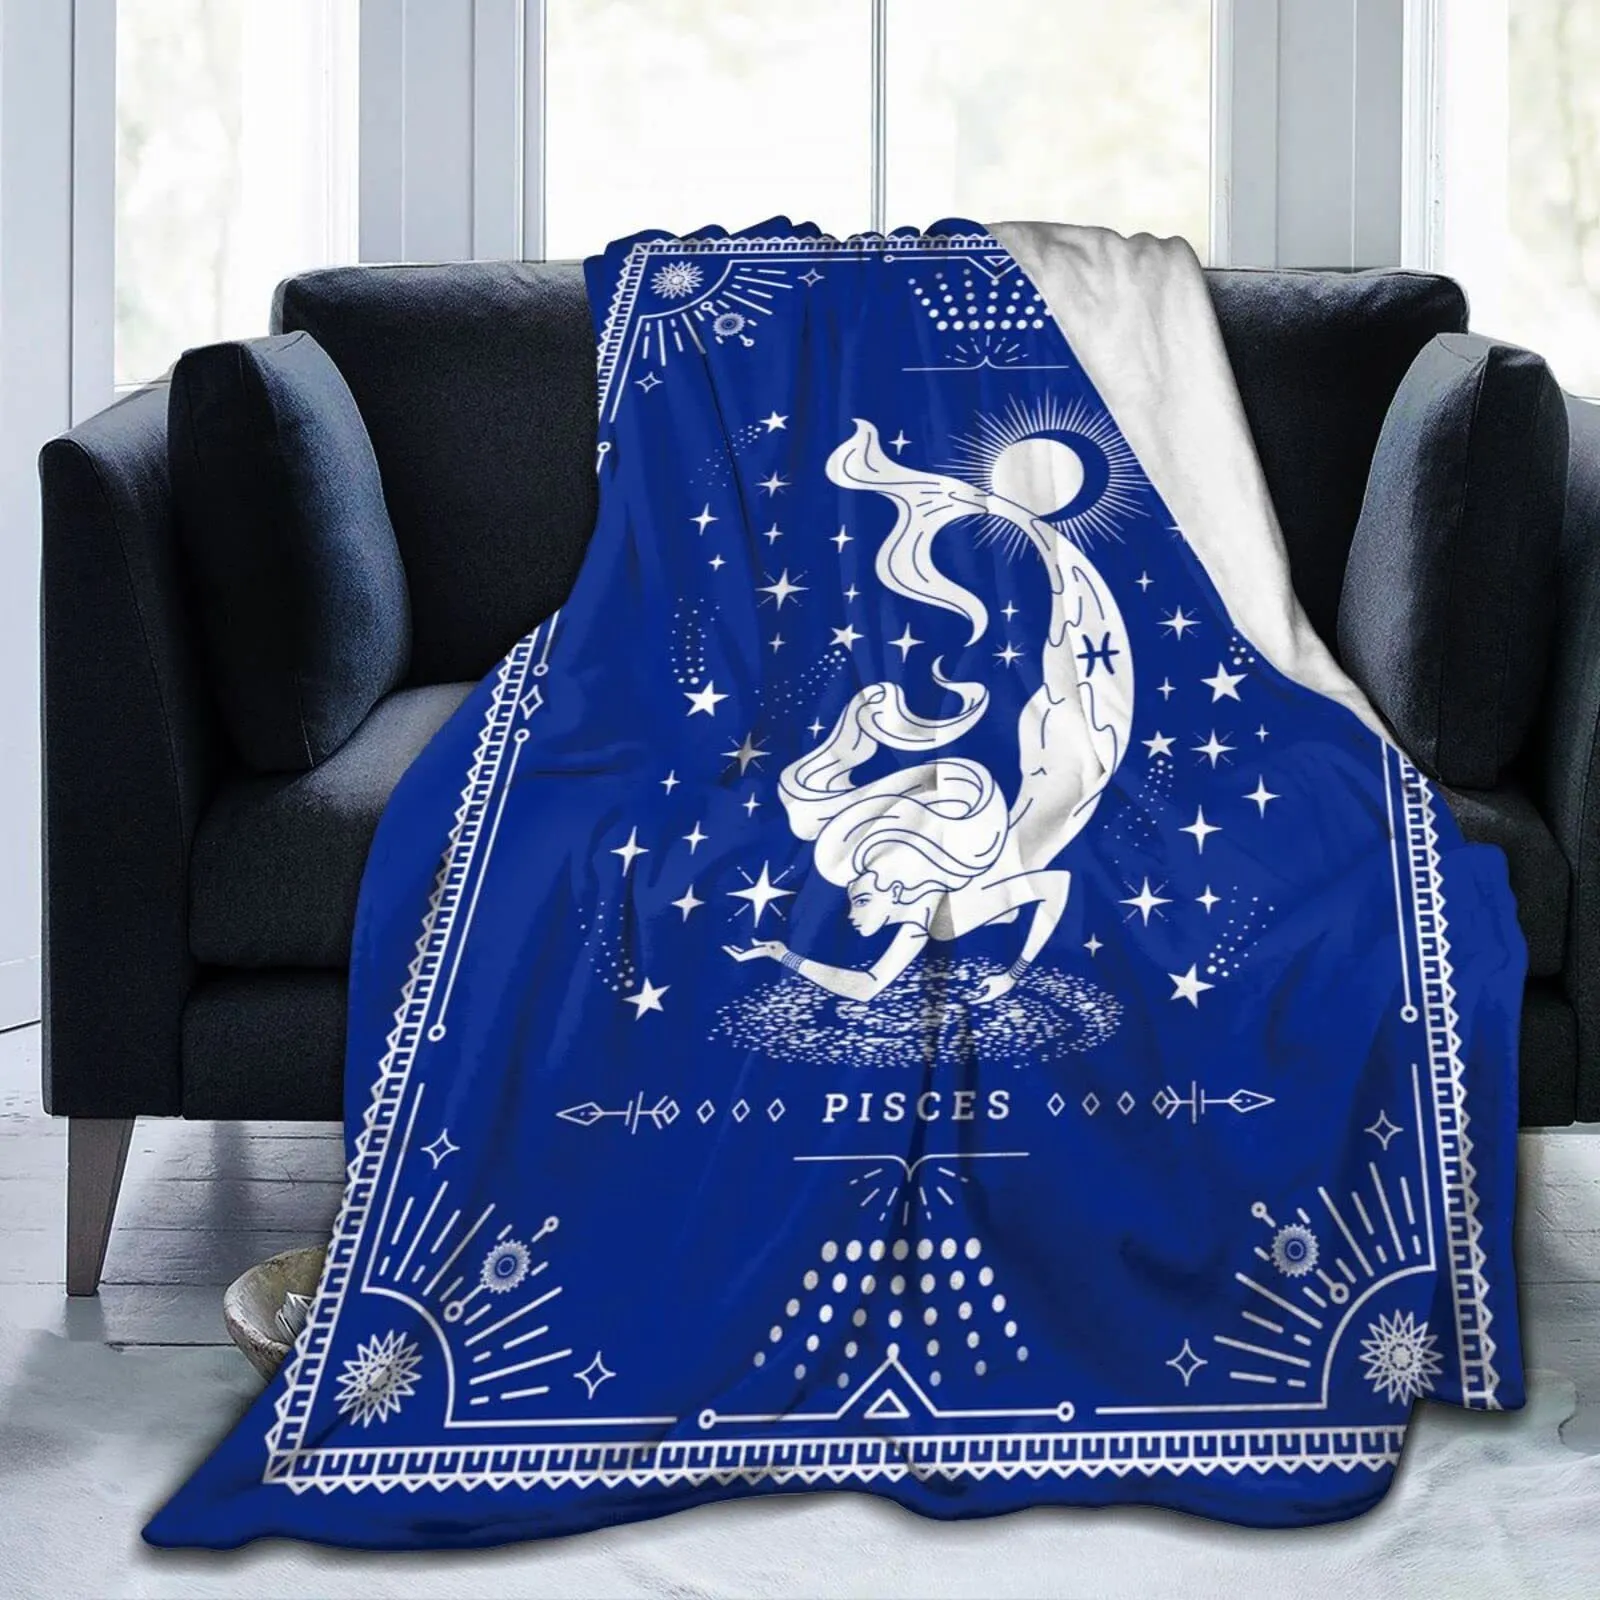 Blankets Pisces Throw Blanket Flannel s Soft 12 Horoscope Astrology Theme Birthday Gifts 230628